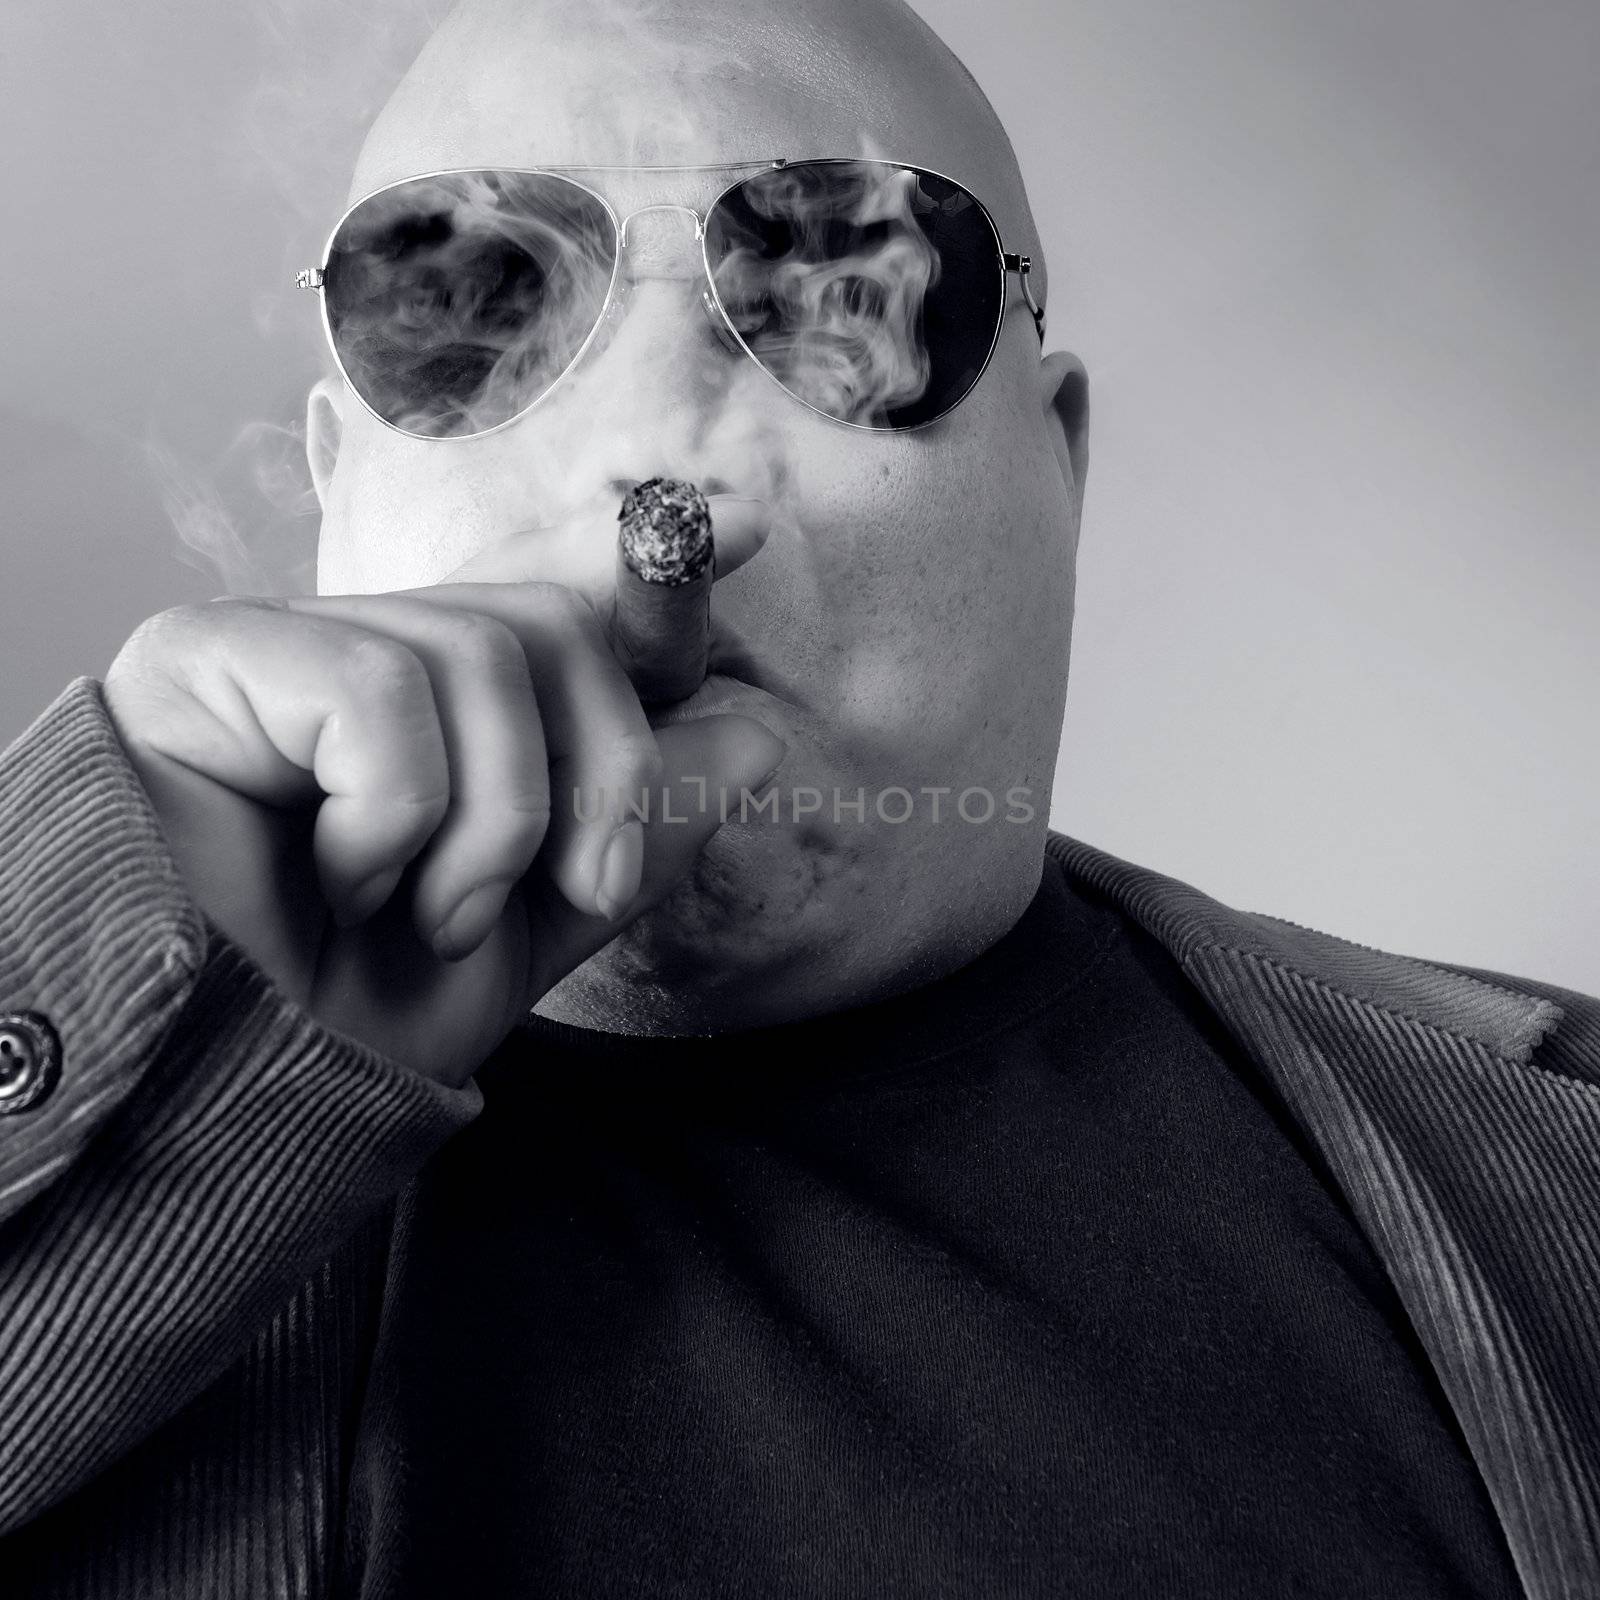 The big Boss, Head Honcho, Top Dog...  An image of the Man in charge, smoking a cigar.
